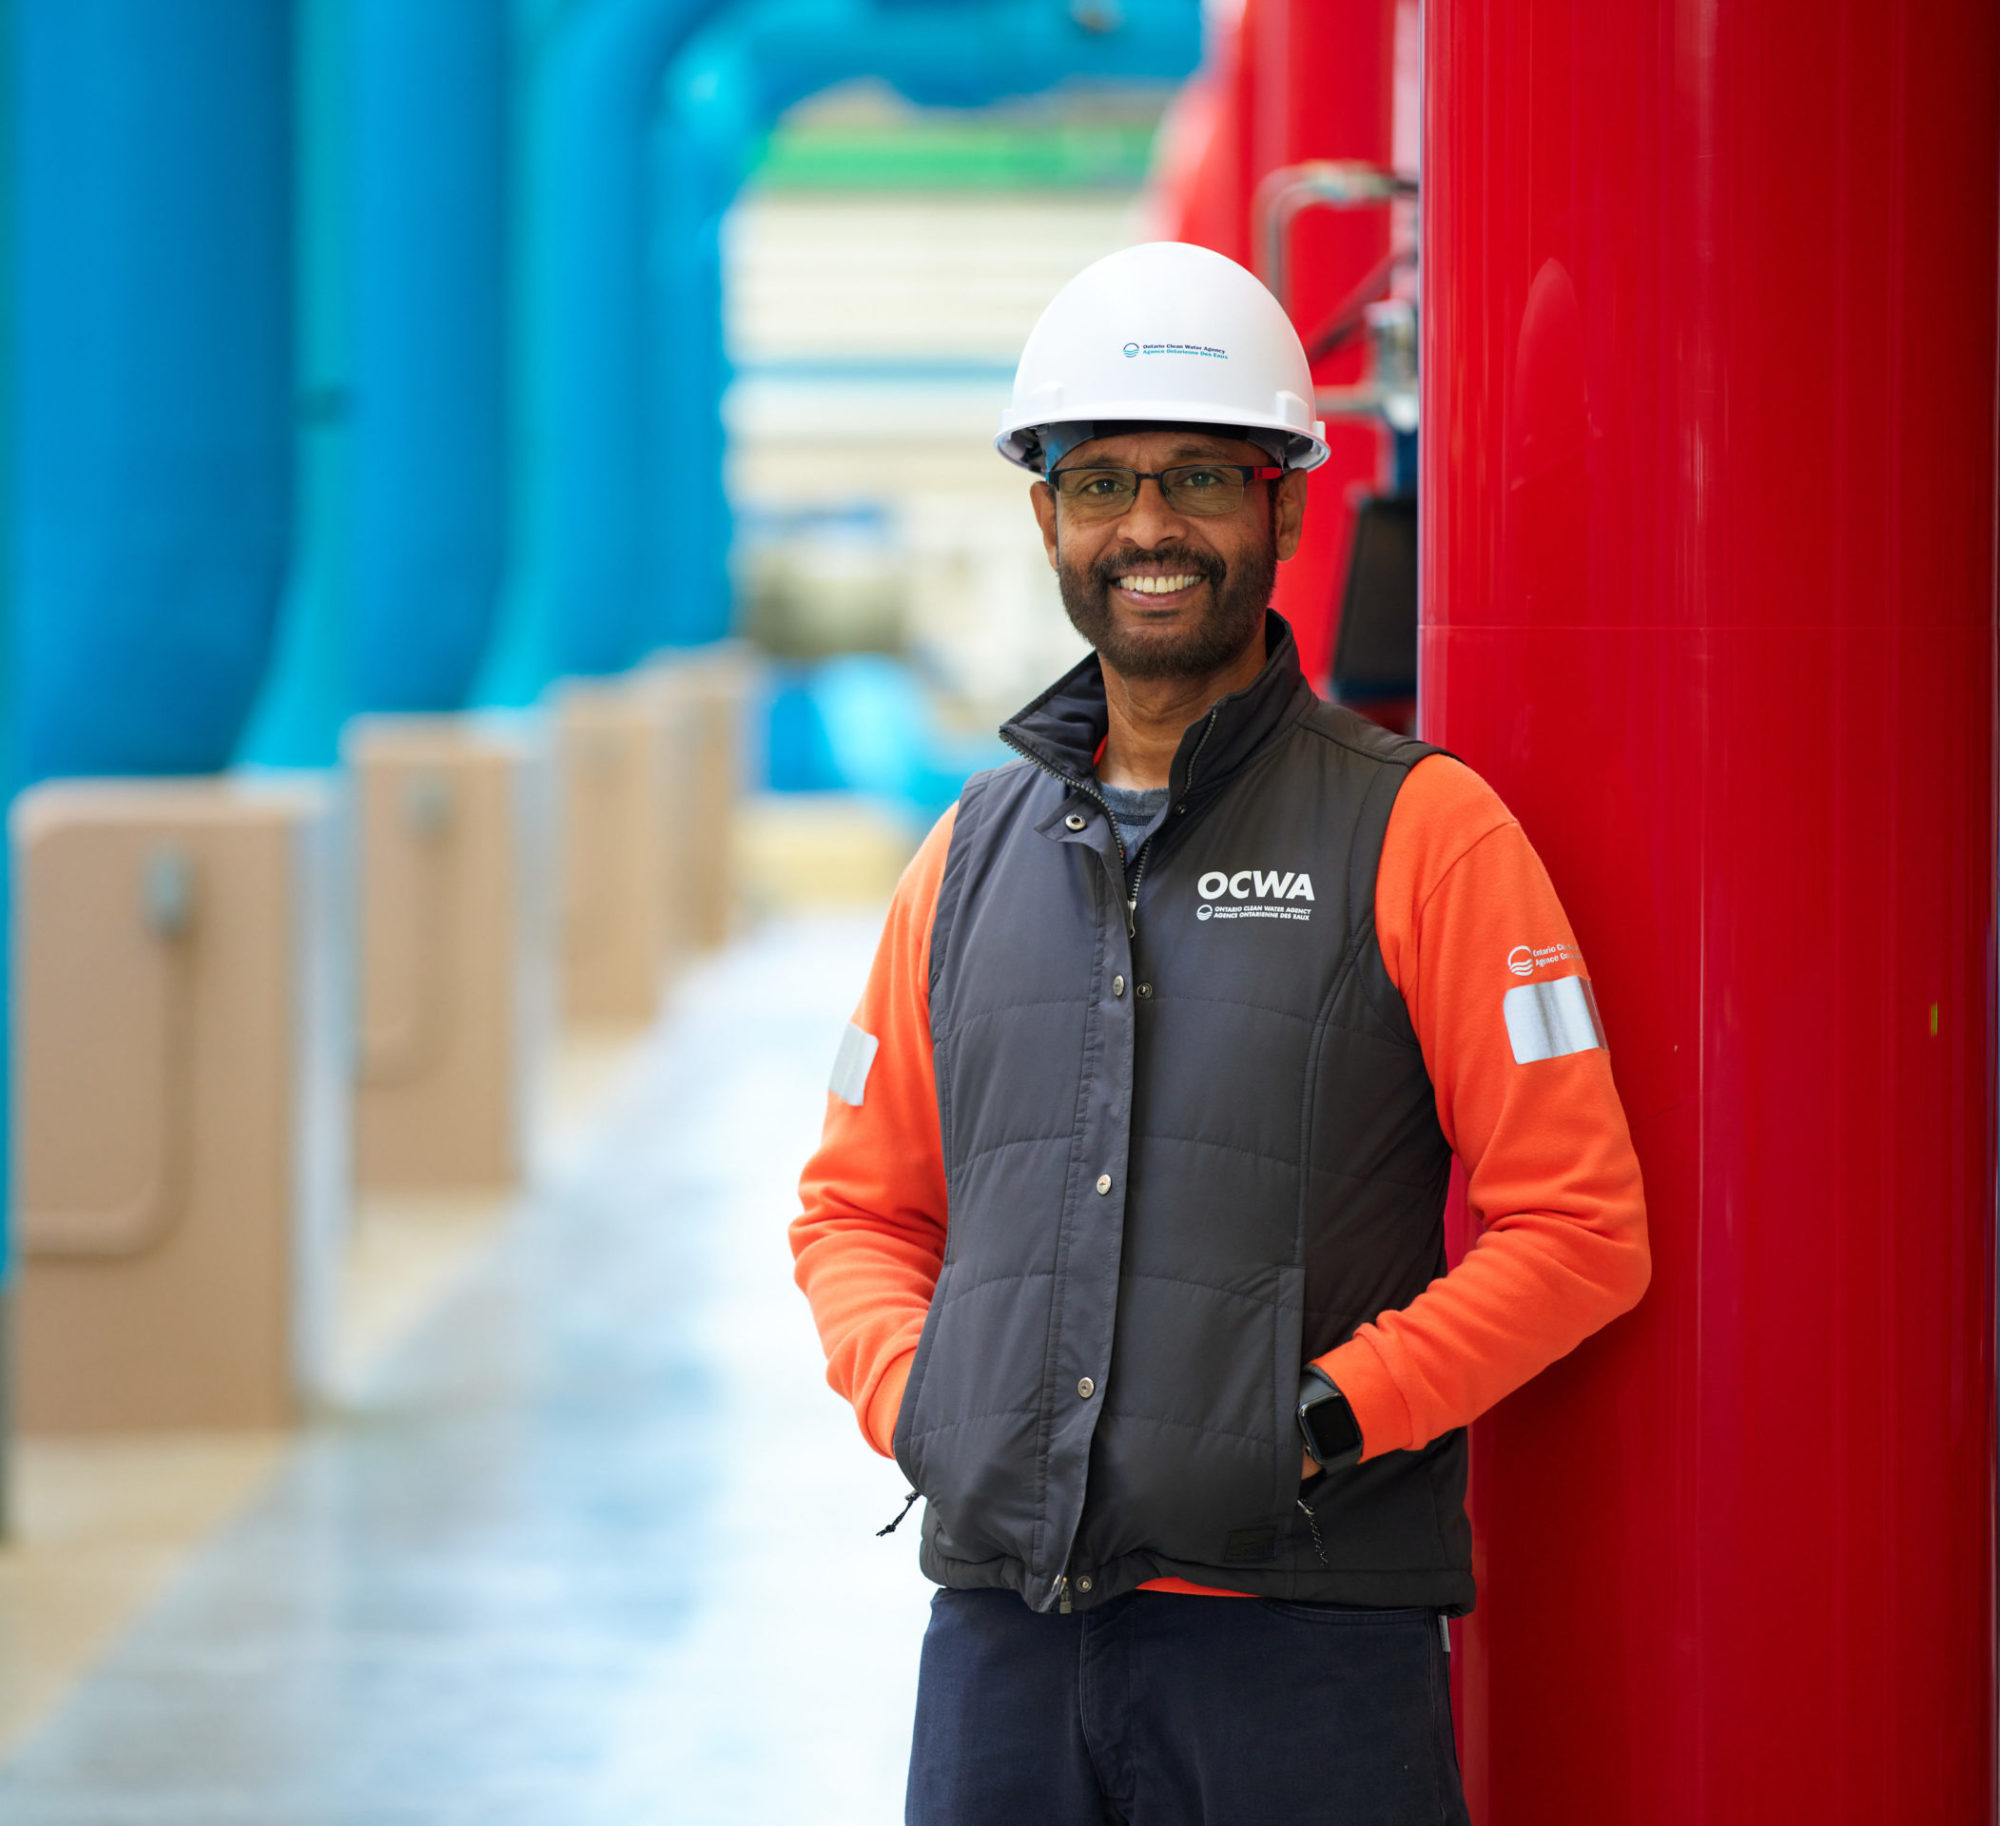 OCWA employee in protective gear standing inside water treatment plant and smiling at the camera